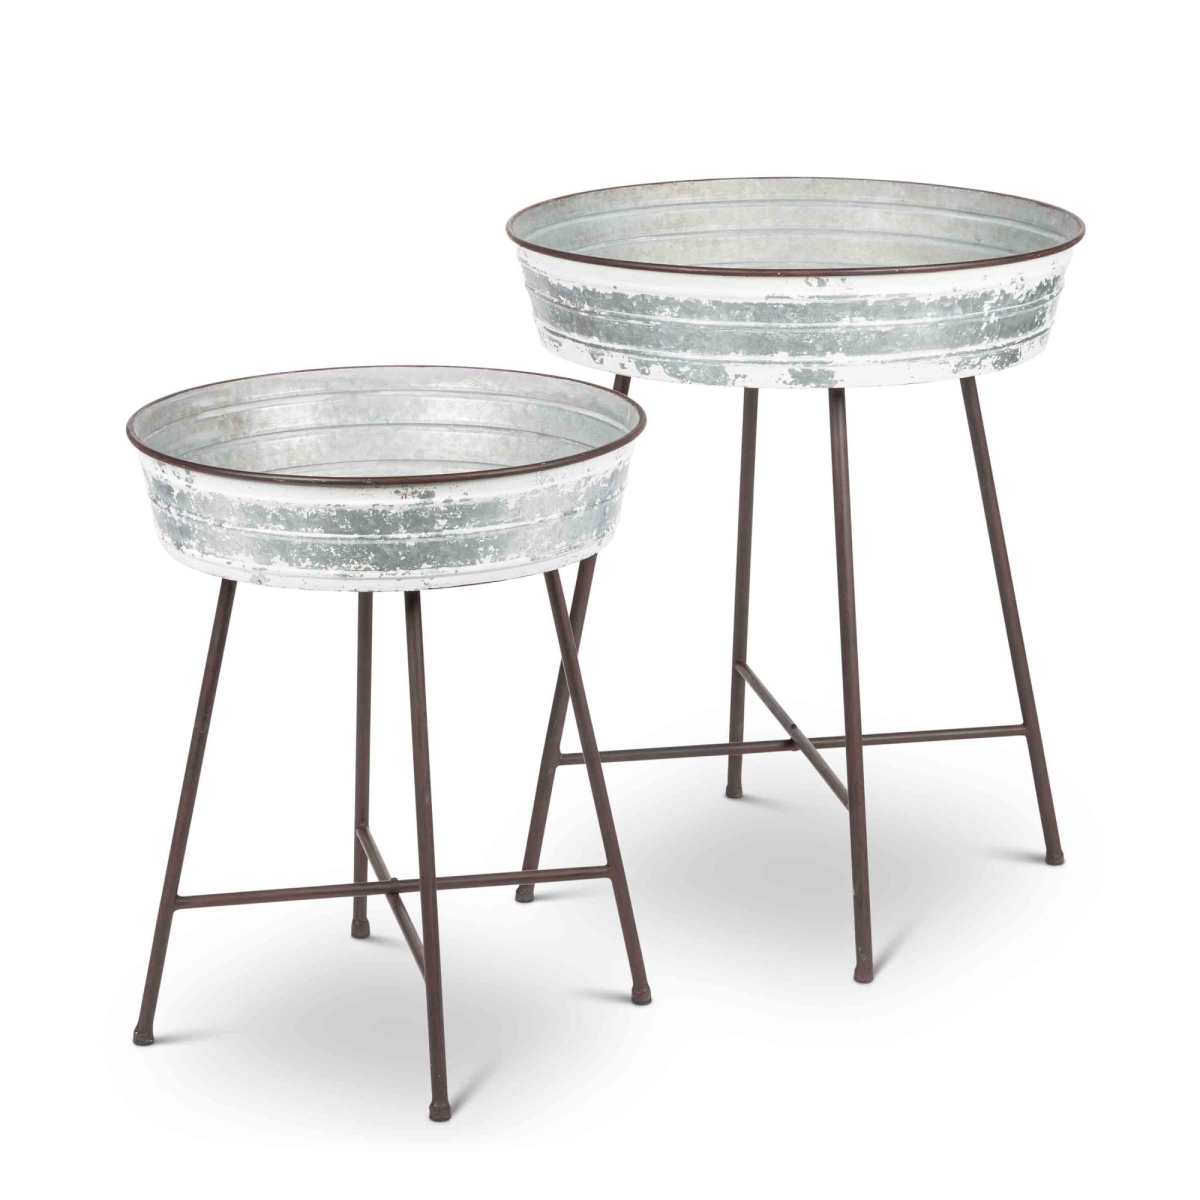 Gerson 94510ec Assorted-size Oversized Galvanized Tray Tables With A Rustic Whitewashed Finish - Grey - Set Of 2